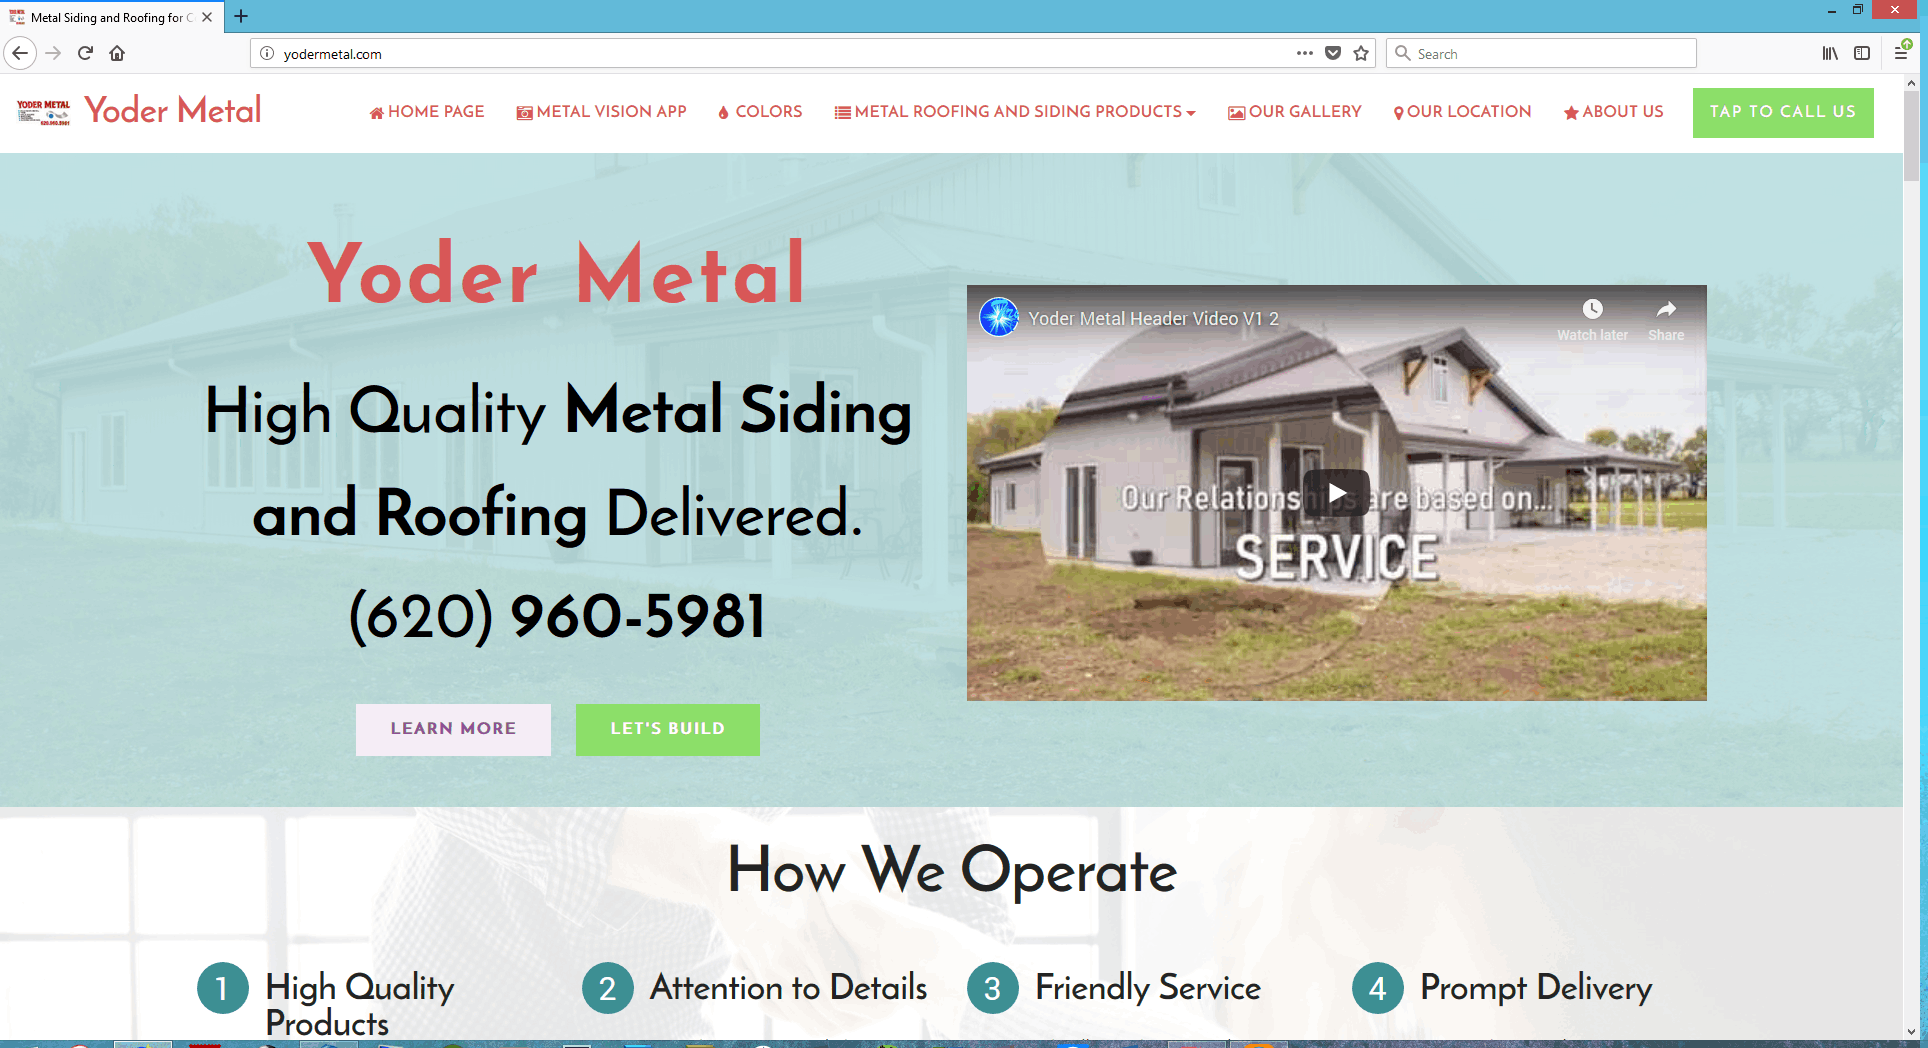 Steel Siding Website Design in Indiana by true star computer solutions